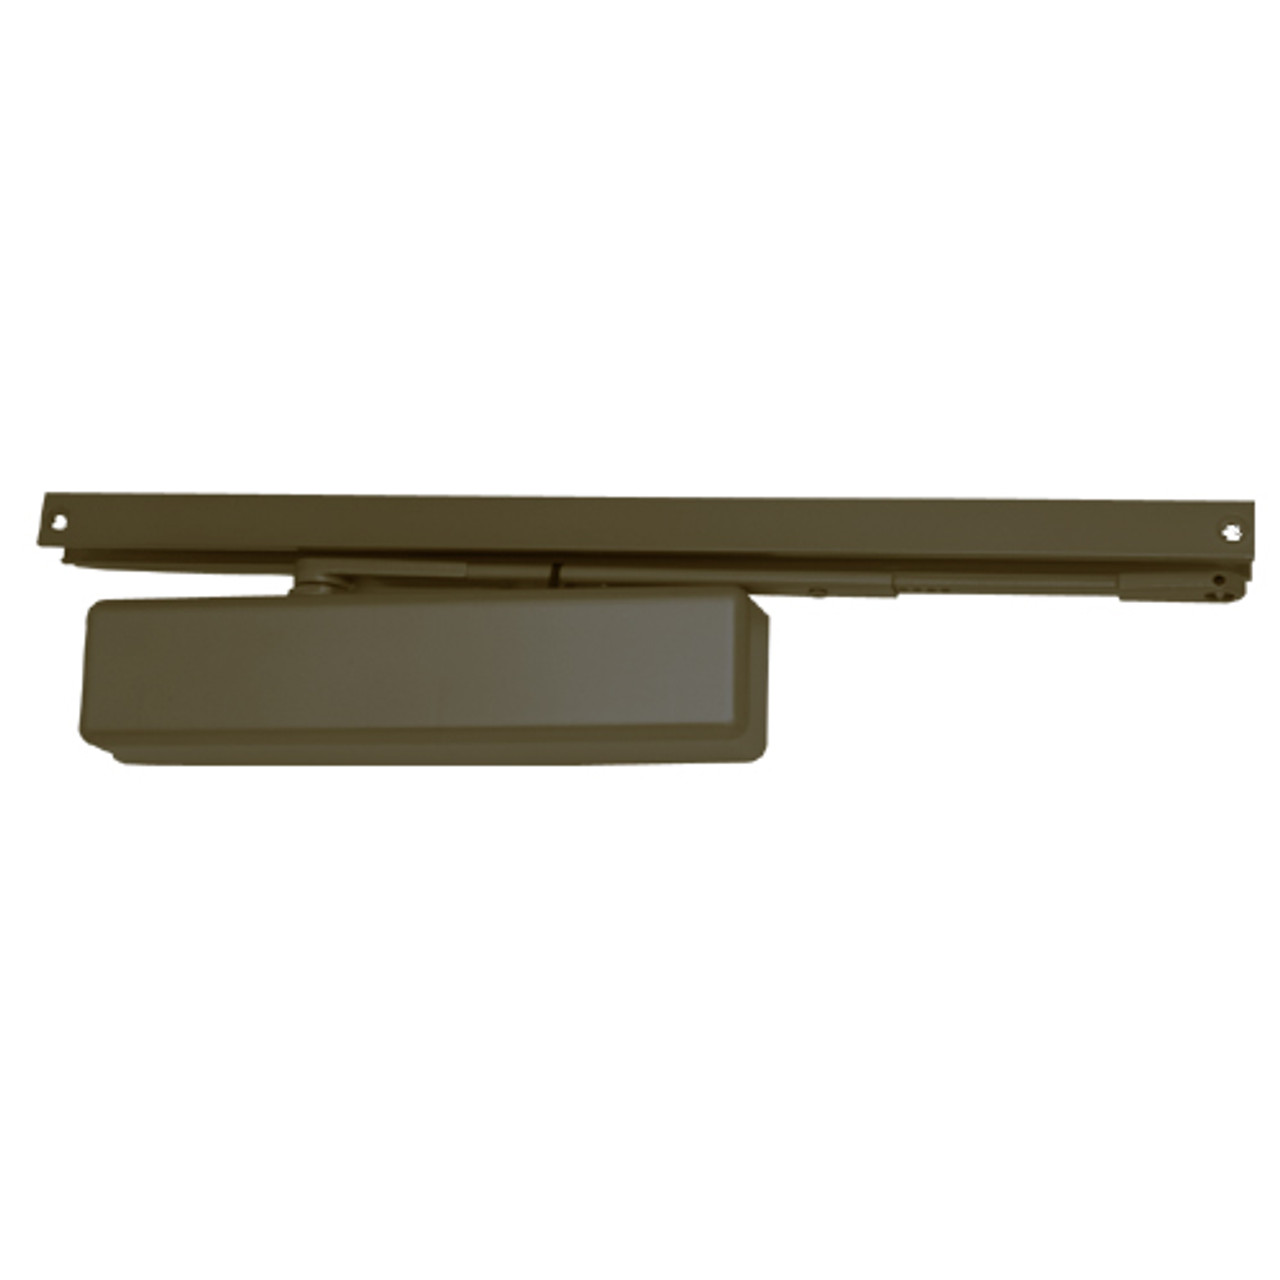 1461T-H-US10B LCN Surface Mount Door Closer with Hold Open Arm in Oil Rubbed Bronze Finish